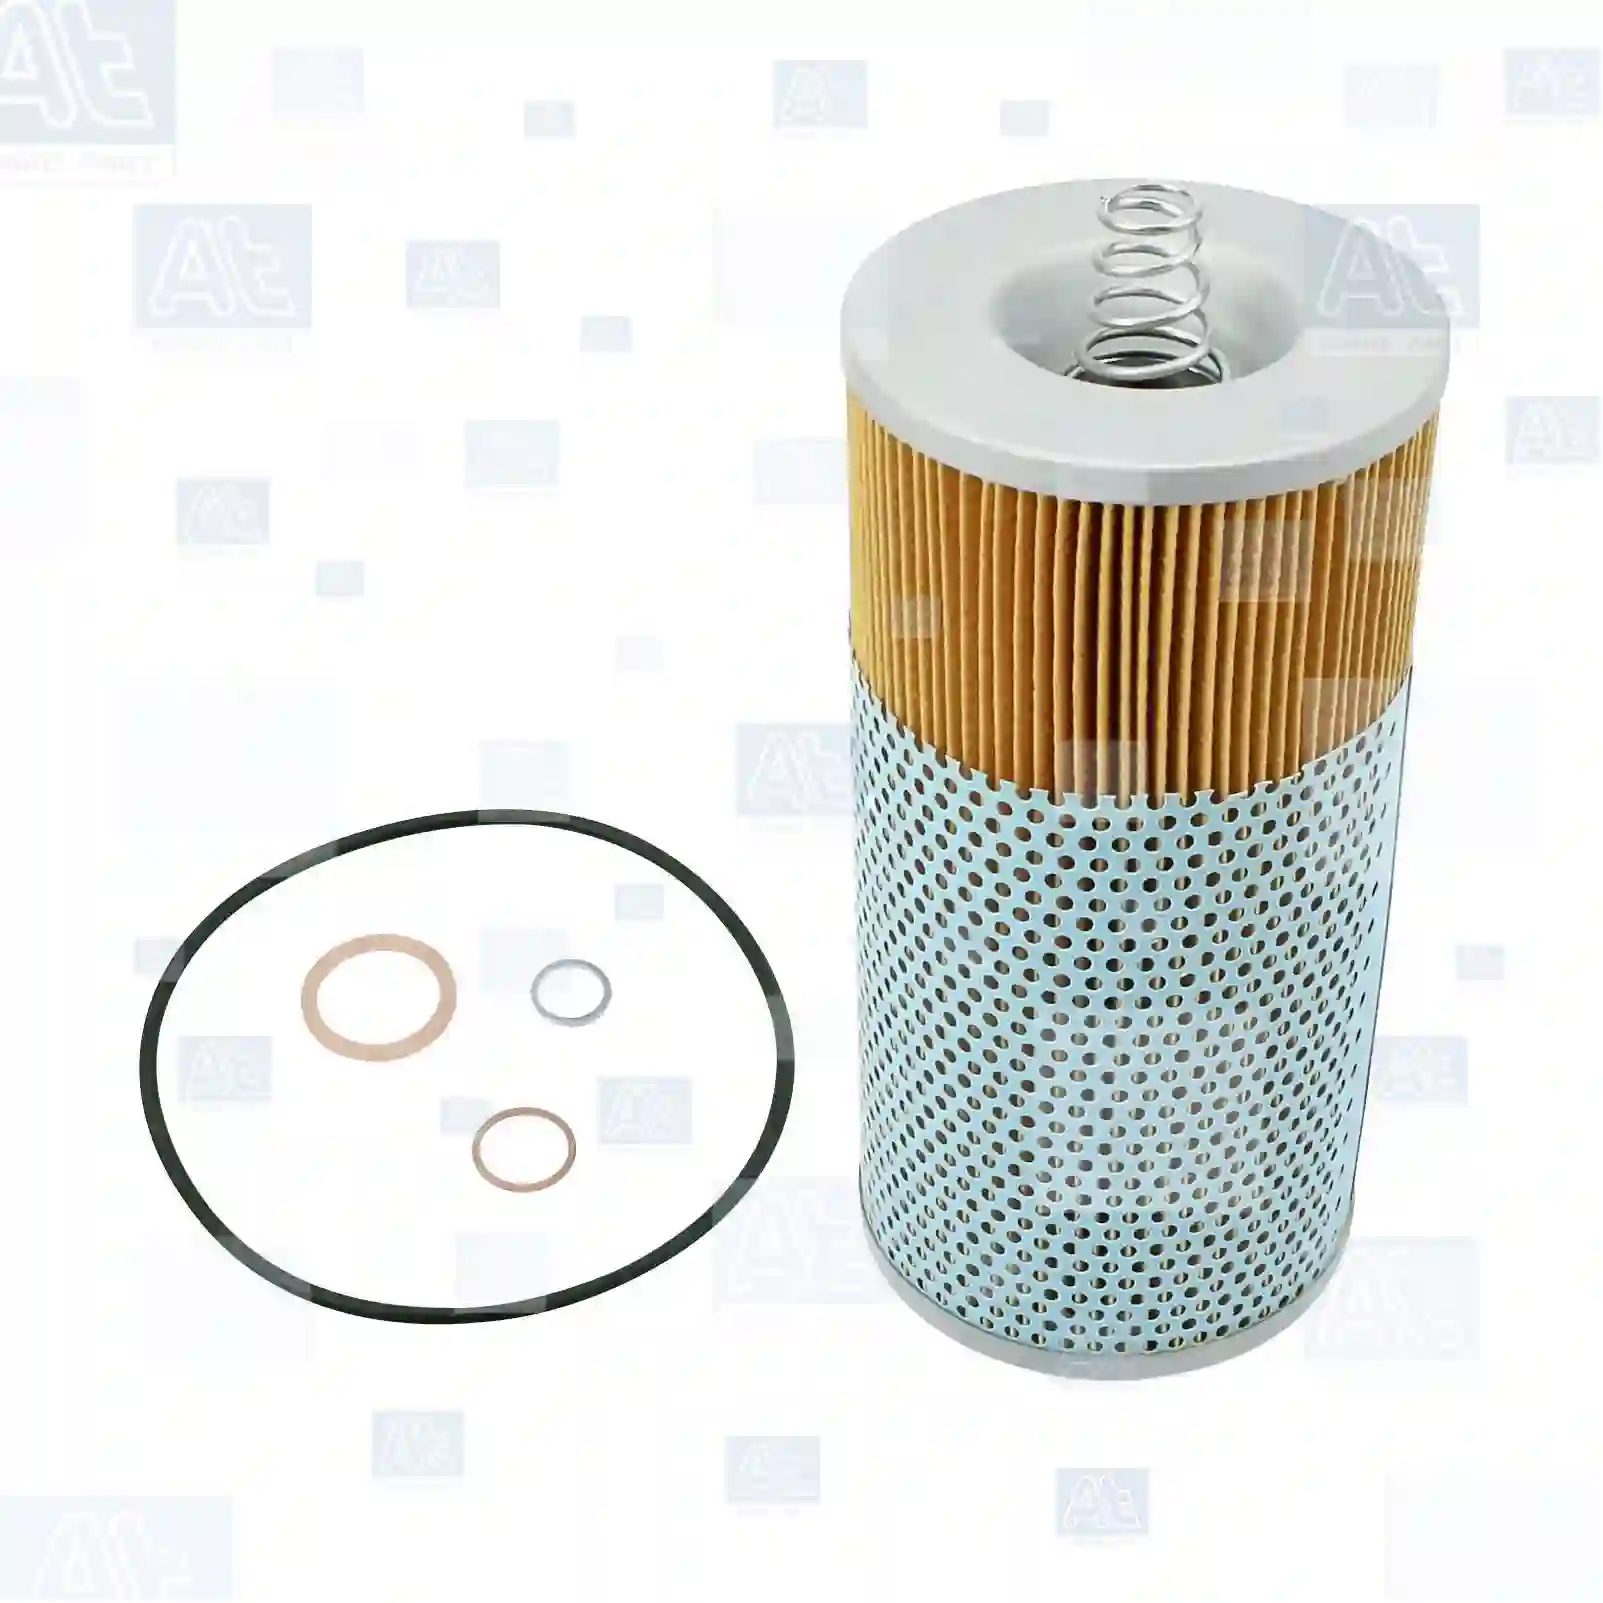 Oil filter insert, at no 77702597, oem no: 11843825, 3371420R1, 7984943, 11843825, 1843825, 4021800009, 4031840025, 4221800210, DC221240, 0001336290, 1500882, BBU6227, 00760424, 760142, 76014200, 760424, 76042400, 988768, 98876800, 5011426, 5011447, 5011889, 7984943, 9975291, 7984923, 7984943, 3371420R1, 108205055, 40001359, 10224238, 5507784, 5602073, 560207308, 7002915, 51000000238, 51005040044, 51005040087, 51055040031, 51055040039, 51055040041, 51055040044, 51055040046, 51055040047, 51055040069, 51055040070, 51055040071, 51055040087, 51055040090, 51055040101, 51055040104, 81000000238, 81055040031, 81055040039, 81055040041, 82055040070, 82055040087, AMO41905, 0001801109, 0001843825, 0011840325, 0011840625, 0011843825, 0021847725, 0402180009, 0412180009, 2031840025, 4021800009, 4031840025, 4221800210, AM041701, 5000043298, 5000243098, 6005019815, LU8425, 8311999136, 8319000098, 51055040087, ZG01733-0008 At Spare Part | Engine, Accelerator Pedal, Camshaft, Connecting Rod, Crankcase, Crankshaft, Cylinder Head, Engine Suspension Mountings, Exhaust Manifold, Exhaust Gas Recirculation, Filter Kits, Flywheel Housing, General Overhaul Kits, Engine, Intake Manifold, Oil Cleaner, Oil Cooler, Oil Filter, Oil Pump, Oil Sump, Piston & Liner, Sensor & Switch, Timing Case, Turbocharger, Cooling System, Belt Tensioner, Coolant Filter, Coolant Pipe, Corrosion Prevention Agent, Drive, Expansion Tank, Fan, Intercooler, Monitors & Gauges, Radiator, Thermostat, V-Belt / Timing belt, Water Pump, Fuel System, Electronical Injector Unit, Feed Pump, Fuel Filter, cpl., Fuel Gauge Sender,  Fuel Line, Fuel Pump, Fuel Tank, Injection Line Kit, Injection Pump, Exhaust System, Clutch & Pedal, Gearbox, Propeller Shaft, Axles, Brake System, Hubs & Wheels, Suspension, Leaf Spring, Universal Parts / Accessories, Steering, Electrical System, Cabin Oil filter insert, at no 77702597, oem no: 11843825, 3371420R1, 7984943, 11843825, 1843825, 4021800009, 4031840025, 4221800210, DC221240, 0001336290, 1500882, BBU6227, 00760424, 760142, 76014200, 760424, 76042400, 988768, 98876800, 5011426, 5011447, 5011889, 7984943, 9975291, 7984923, 7984943, 3371420R1, 108205055, 40001359, 10224238, 5507784, 5602073, 560207308, 7002915, 51000000238, 51005040044, 51005040087, 51055040031, 51055040039, 51055040041, 51055040044, 51055040046, 51055040047, 51055040069, 51055040070, 51055040071, 51055040087, 51055040090, 51055040101, 51055040104, 81000000238, 81055040031, 81055040039, 81055040041, 82055040070, 82055040087, AMO41905, 0001801109, 0001843825, 0011840325, 0011840625, 0011843825, 0021847725, 0402180009, 0412180009, 2031840025, 4021800009, 4031840025, 4221800210, AM041701, 5000043298, 5000243098, 6005019815, LU8425, 8311999136, 8319000098, 51055040087, ZG01733-0008 At Spare Part | Engine, Accelerator Pedal, Camshaft, Connecting Rod, Crankcase, Crankshaft, Cylinder Head, Engine Suspension Mountings, Exhaust Manifold, Exhaust Gas Recirculation, Filter Kits, Flywheel Housing, General Overhaul Kits, Engine, Intake Manifold, Oil Cleaner, Oil Cooler, Oil Filter, Oil Pump, Oil Sump, Piston & Liner, Sensor & Switch, Timing Case, Turbocharger, Cooling System, Belt Tensioner, Coolant Filter, Coolant Pipe, Corrosion Prevention Agent, Drive, Expansion Tank, Fan, Intercooler, Monitors & Gauges, Radiator, Thermostat, V-Belt / Timing belt, Water Pump, Fuel System, Electronical Injector Unit, Feed Pump, Fuel Filter, cpl., Fuel Gauge Sender,  Fuel Line, Fuel Pump, Fuel Tank, Injection Line Kit, Injection Pump, Exhaust System, Clutch & Pedal, Gearbox, Propeller Shaft, Axles, Brake System, Hubs & Wheels, Suspension, Leaf Spring, Universal Parts / Accessories, Steering, Electrical System, Cabin